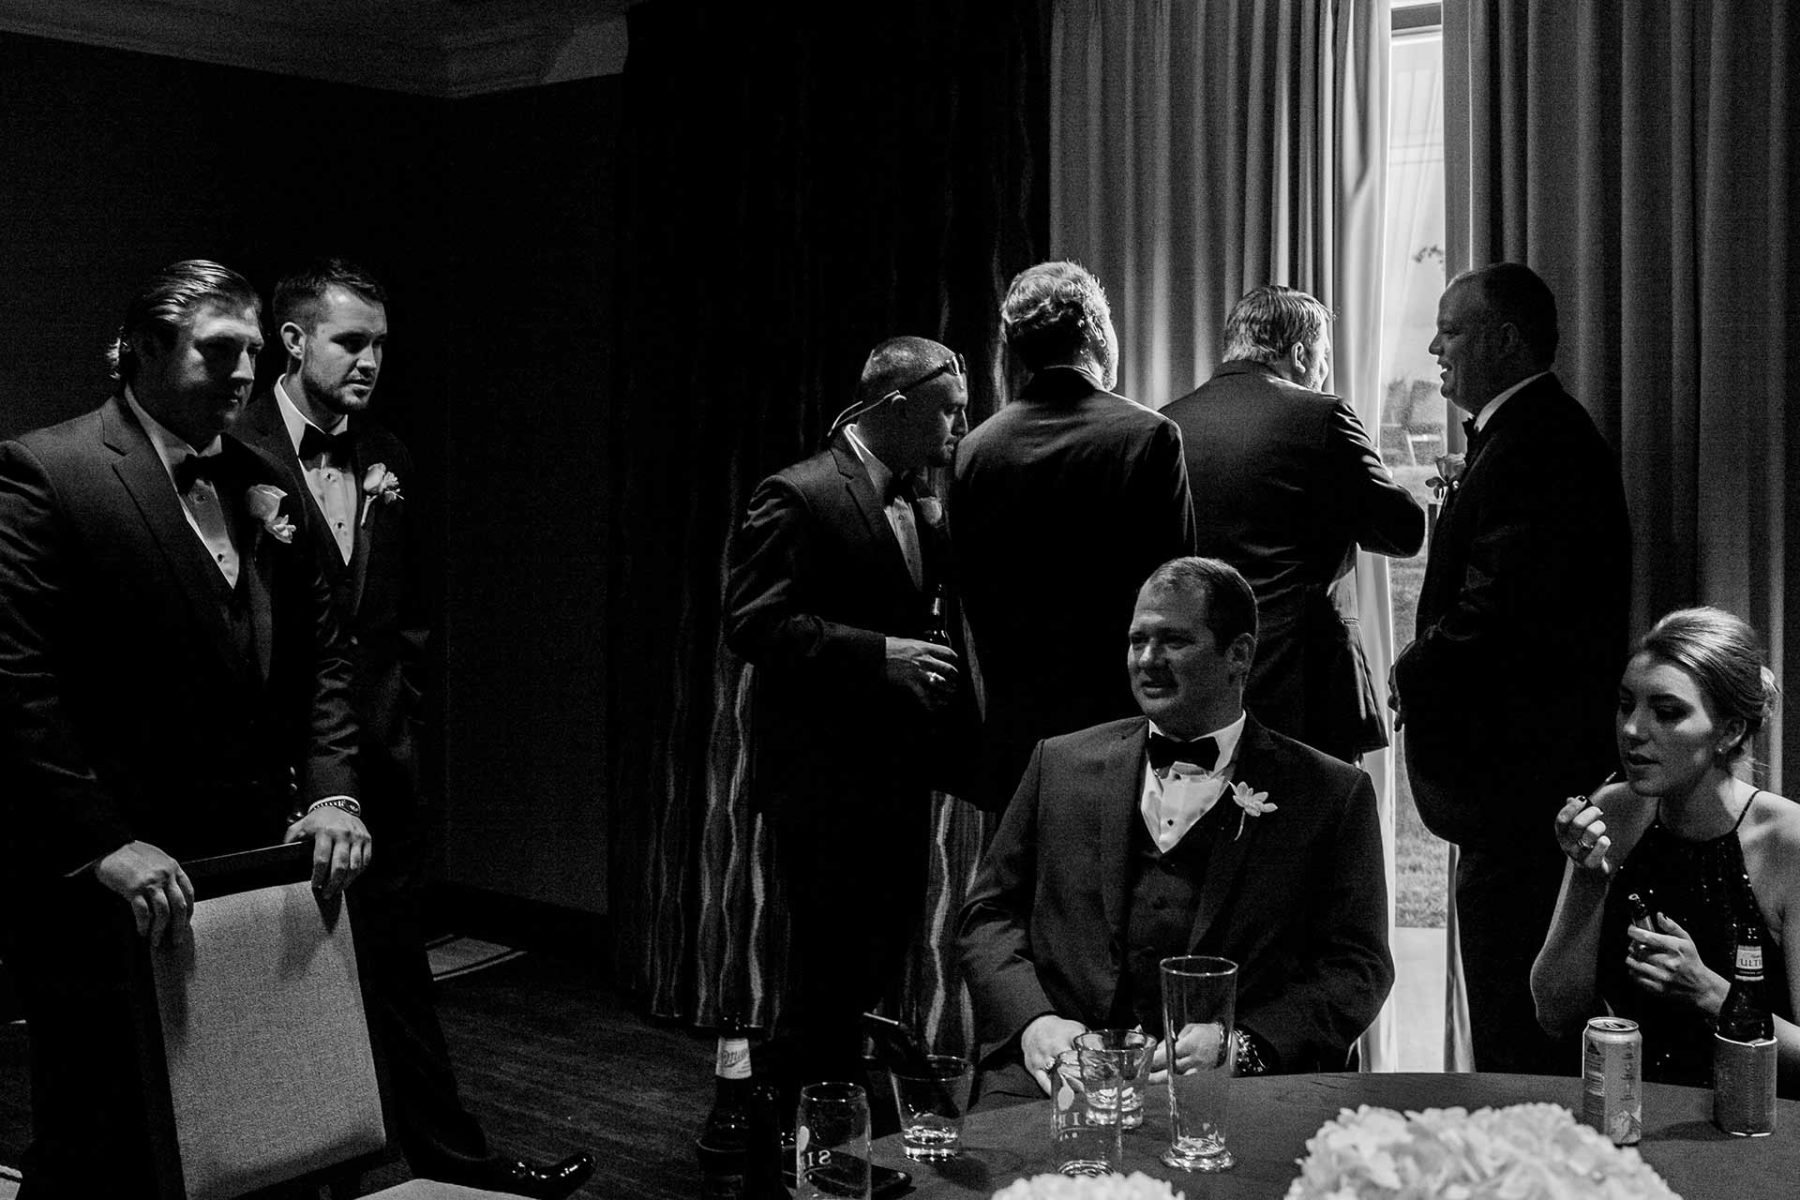 During final preperations at La Cantera in San Antonio the groom and groomsmen look out window similar ti The Godfather movie scene